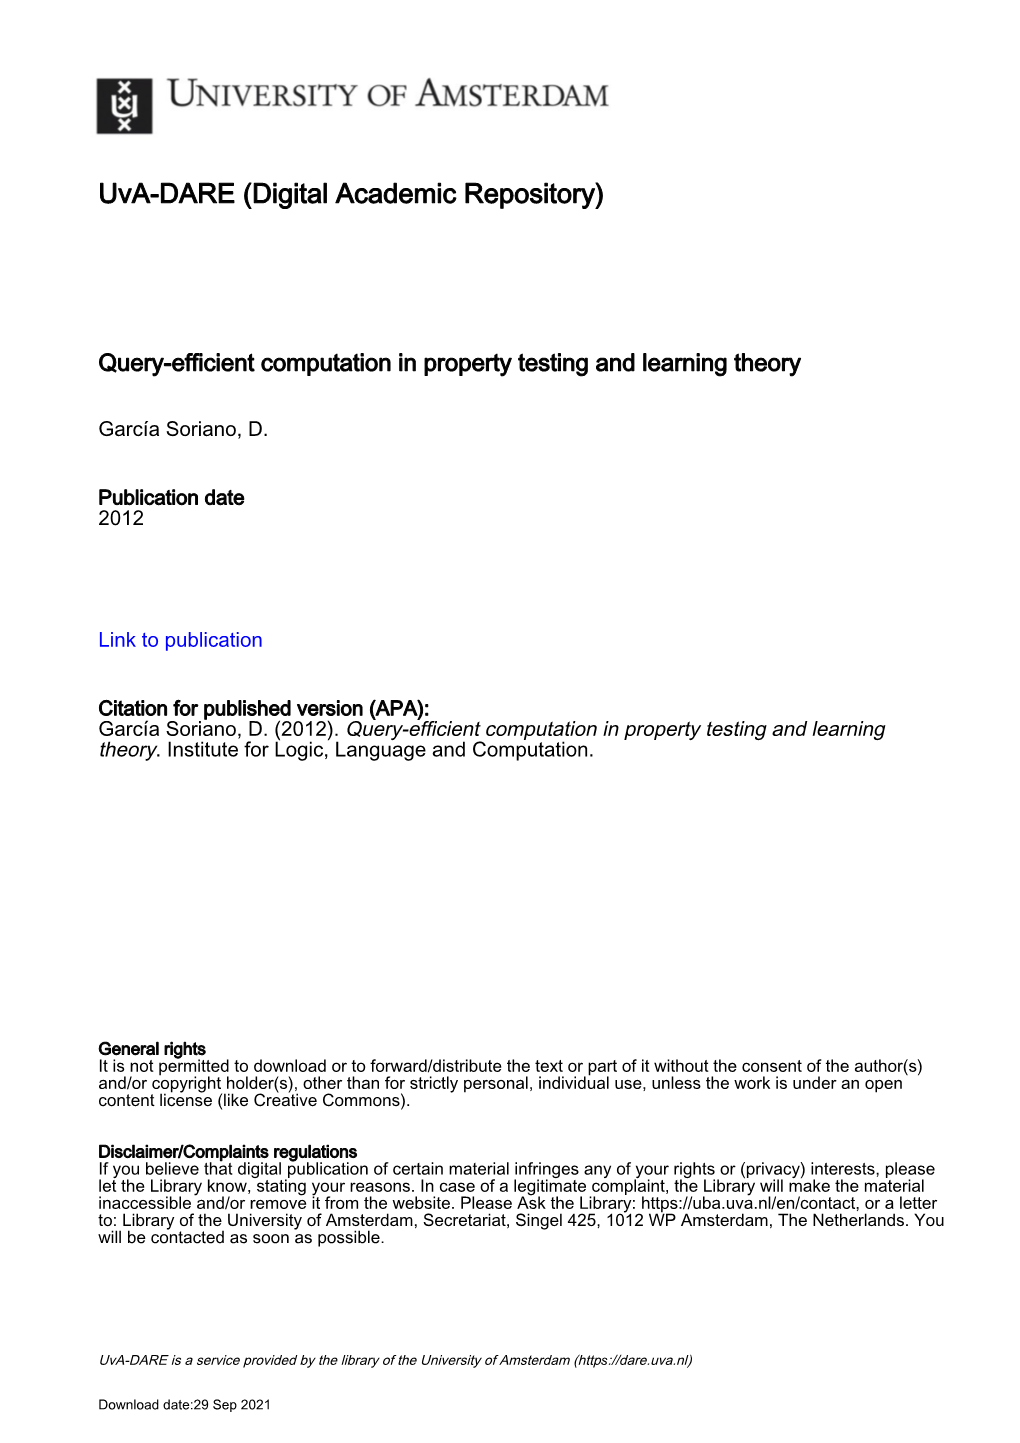 Query-Efficient Computation in Property Testing and Learning Theory